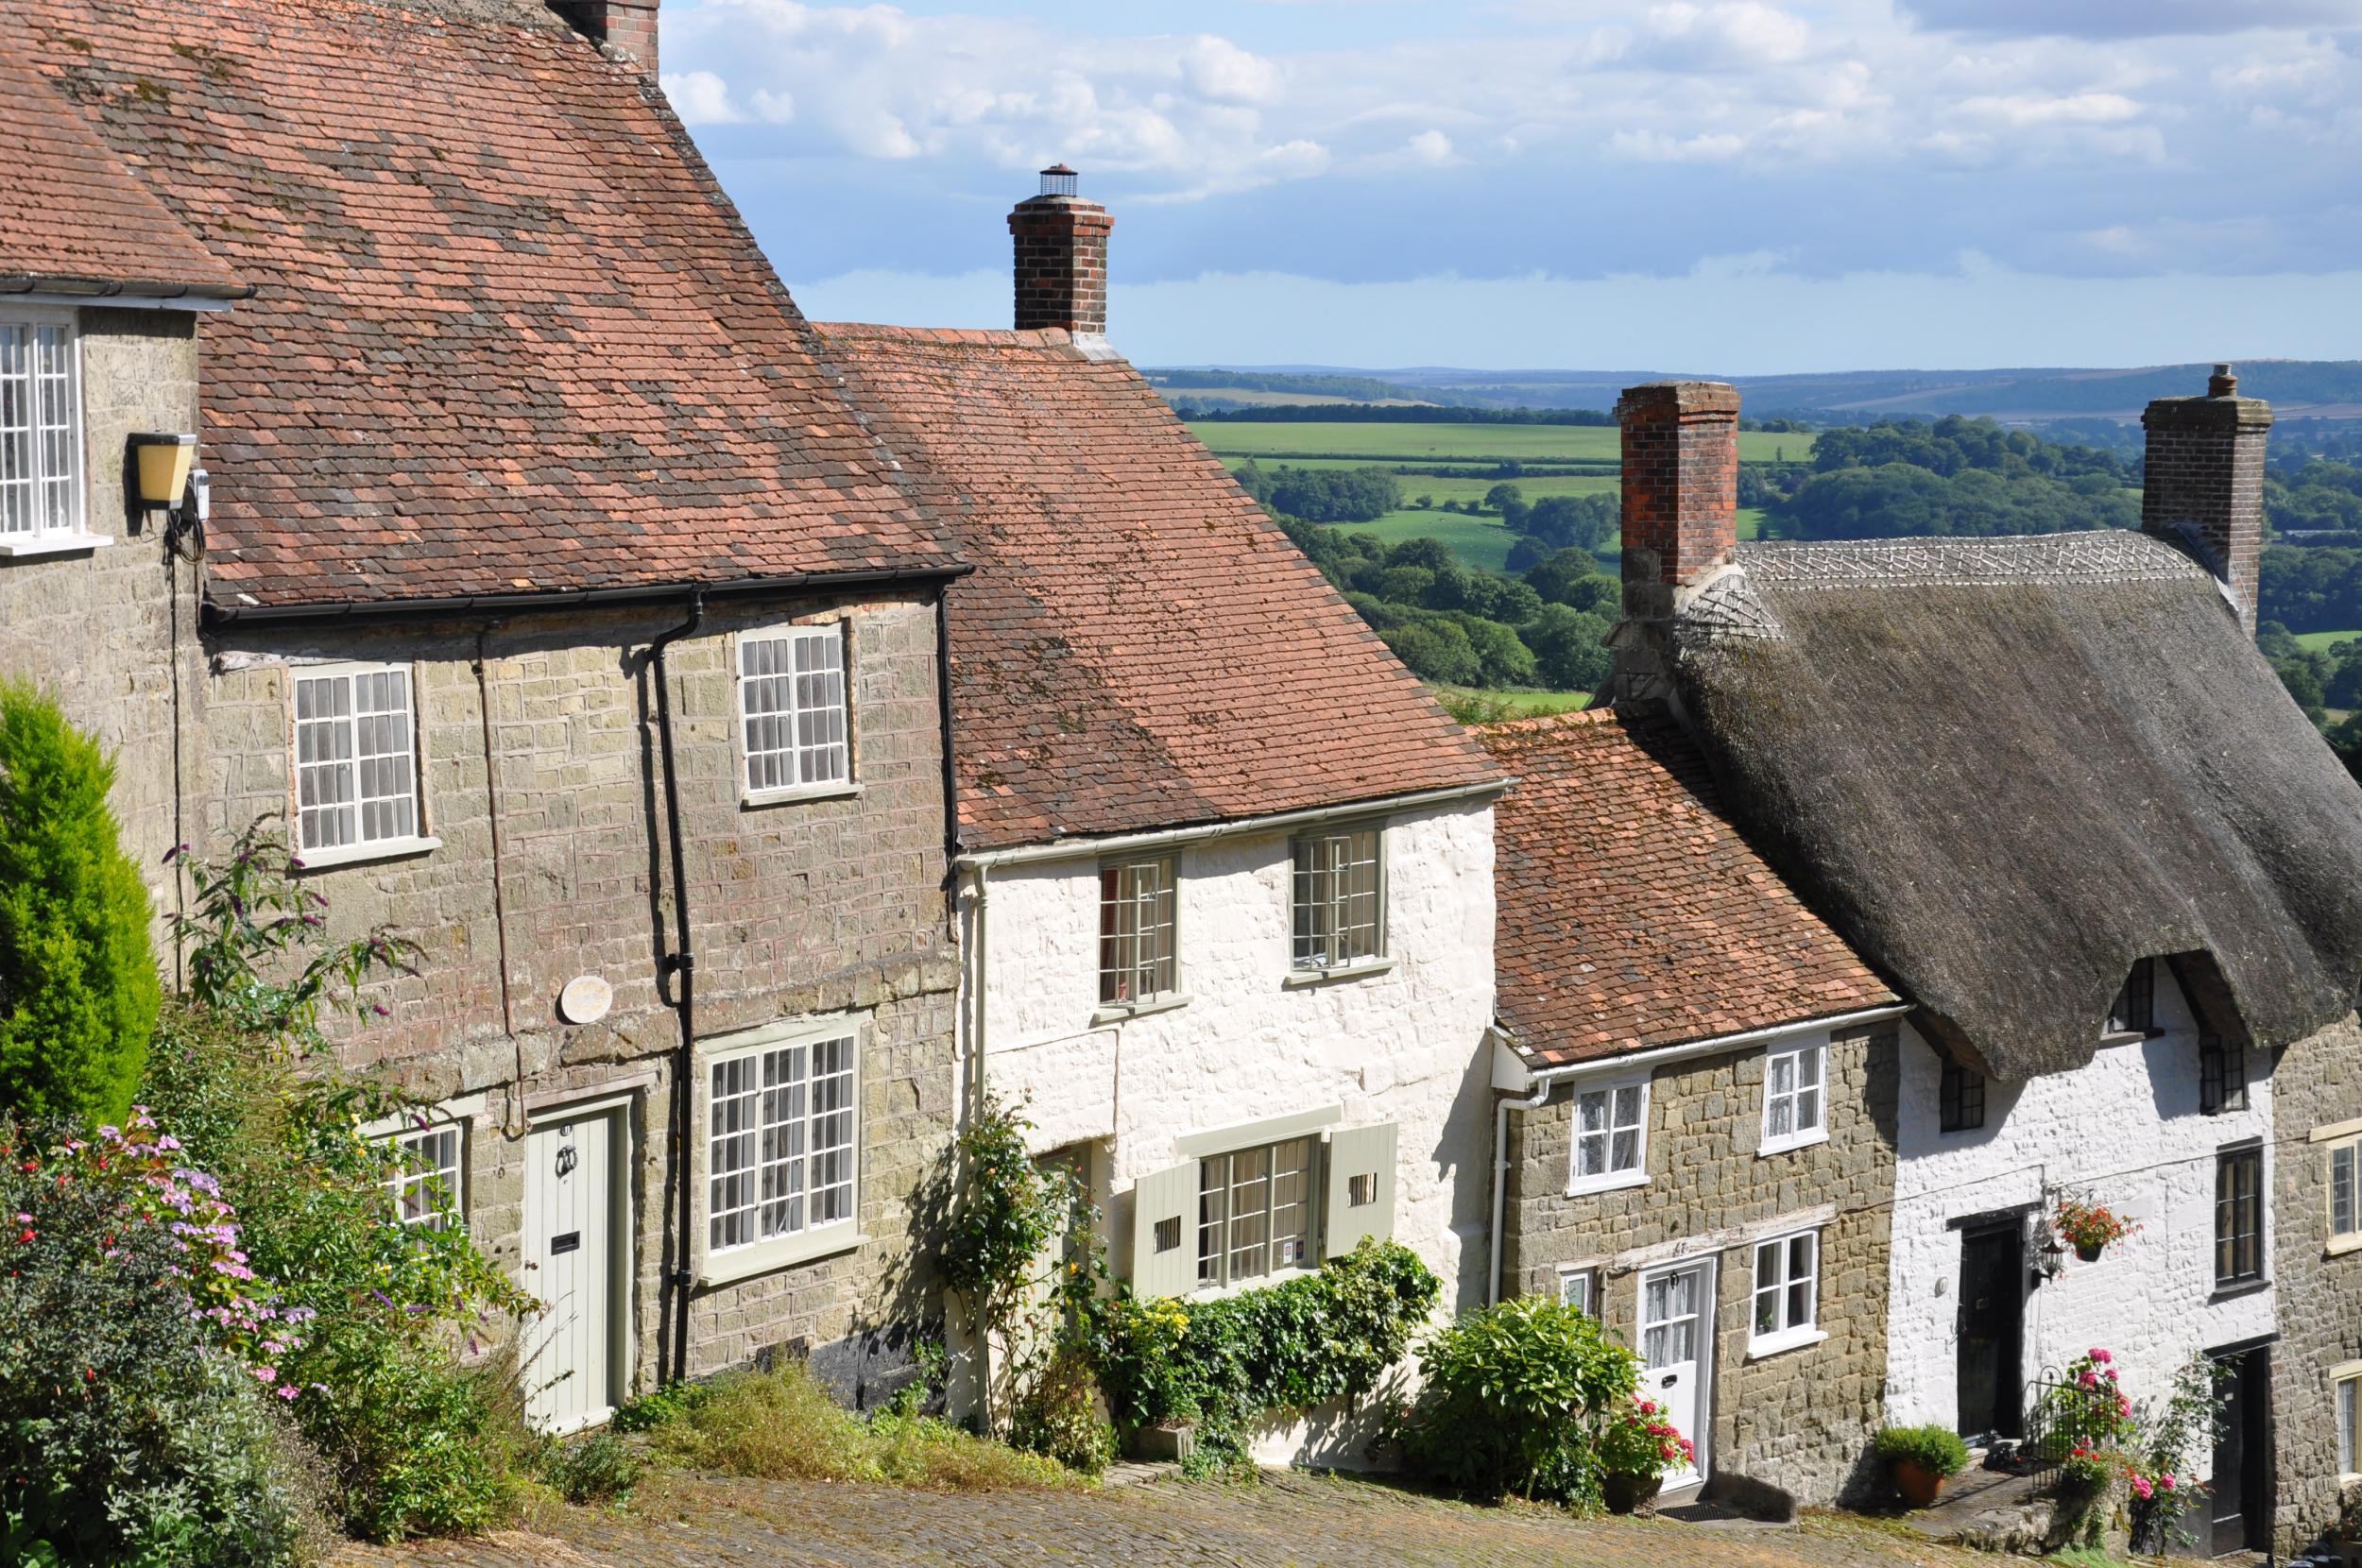 Updown Cottage is described as ‘simply one of the most charming houses in England’